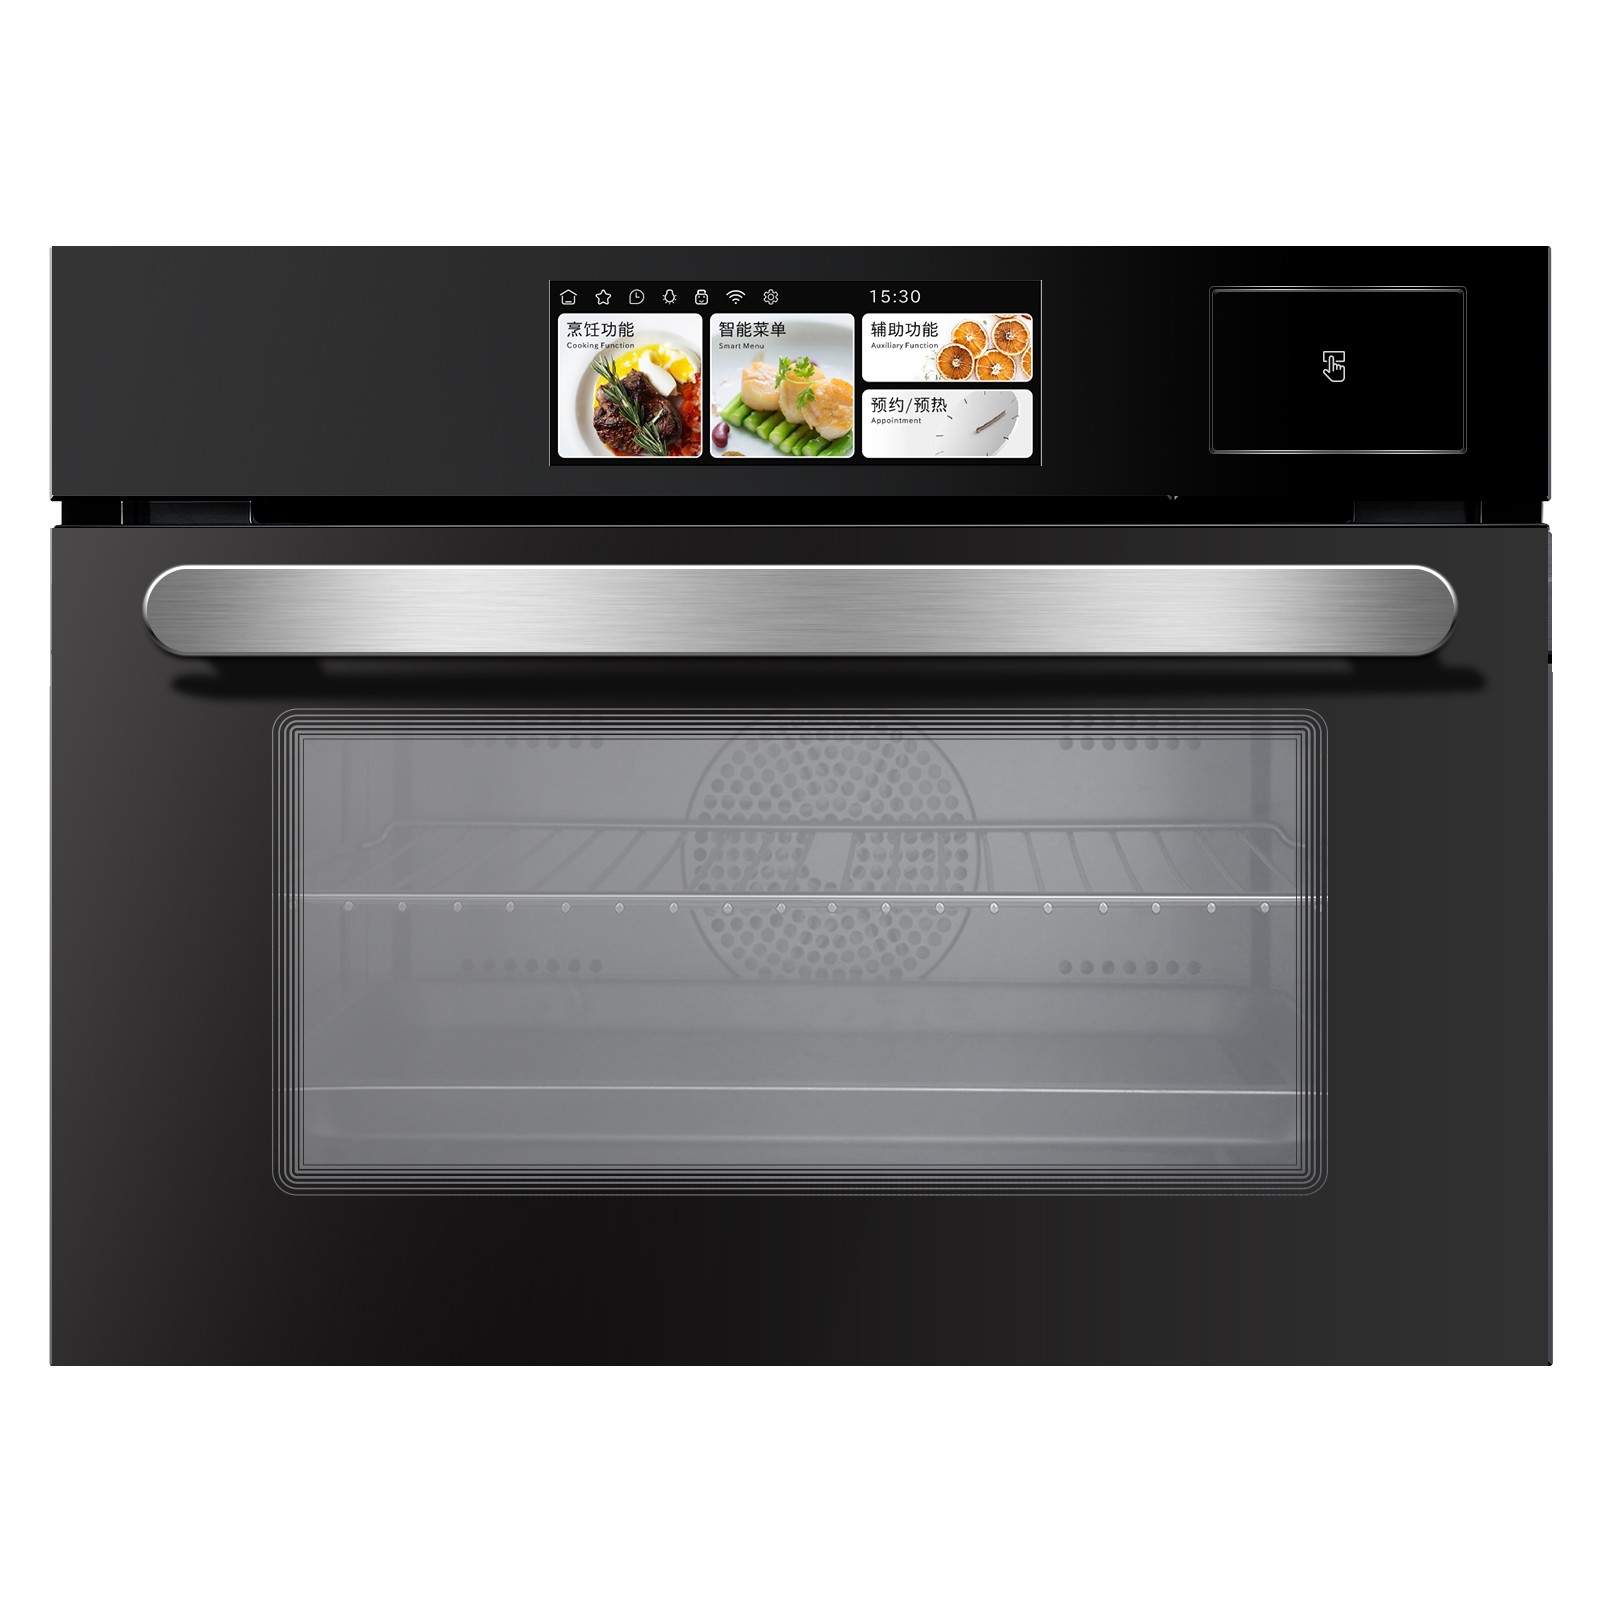 Built-in combi steam oven S47TQ-A